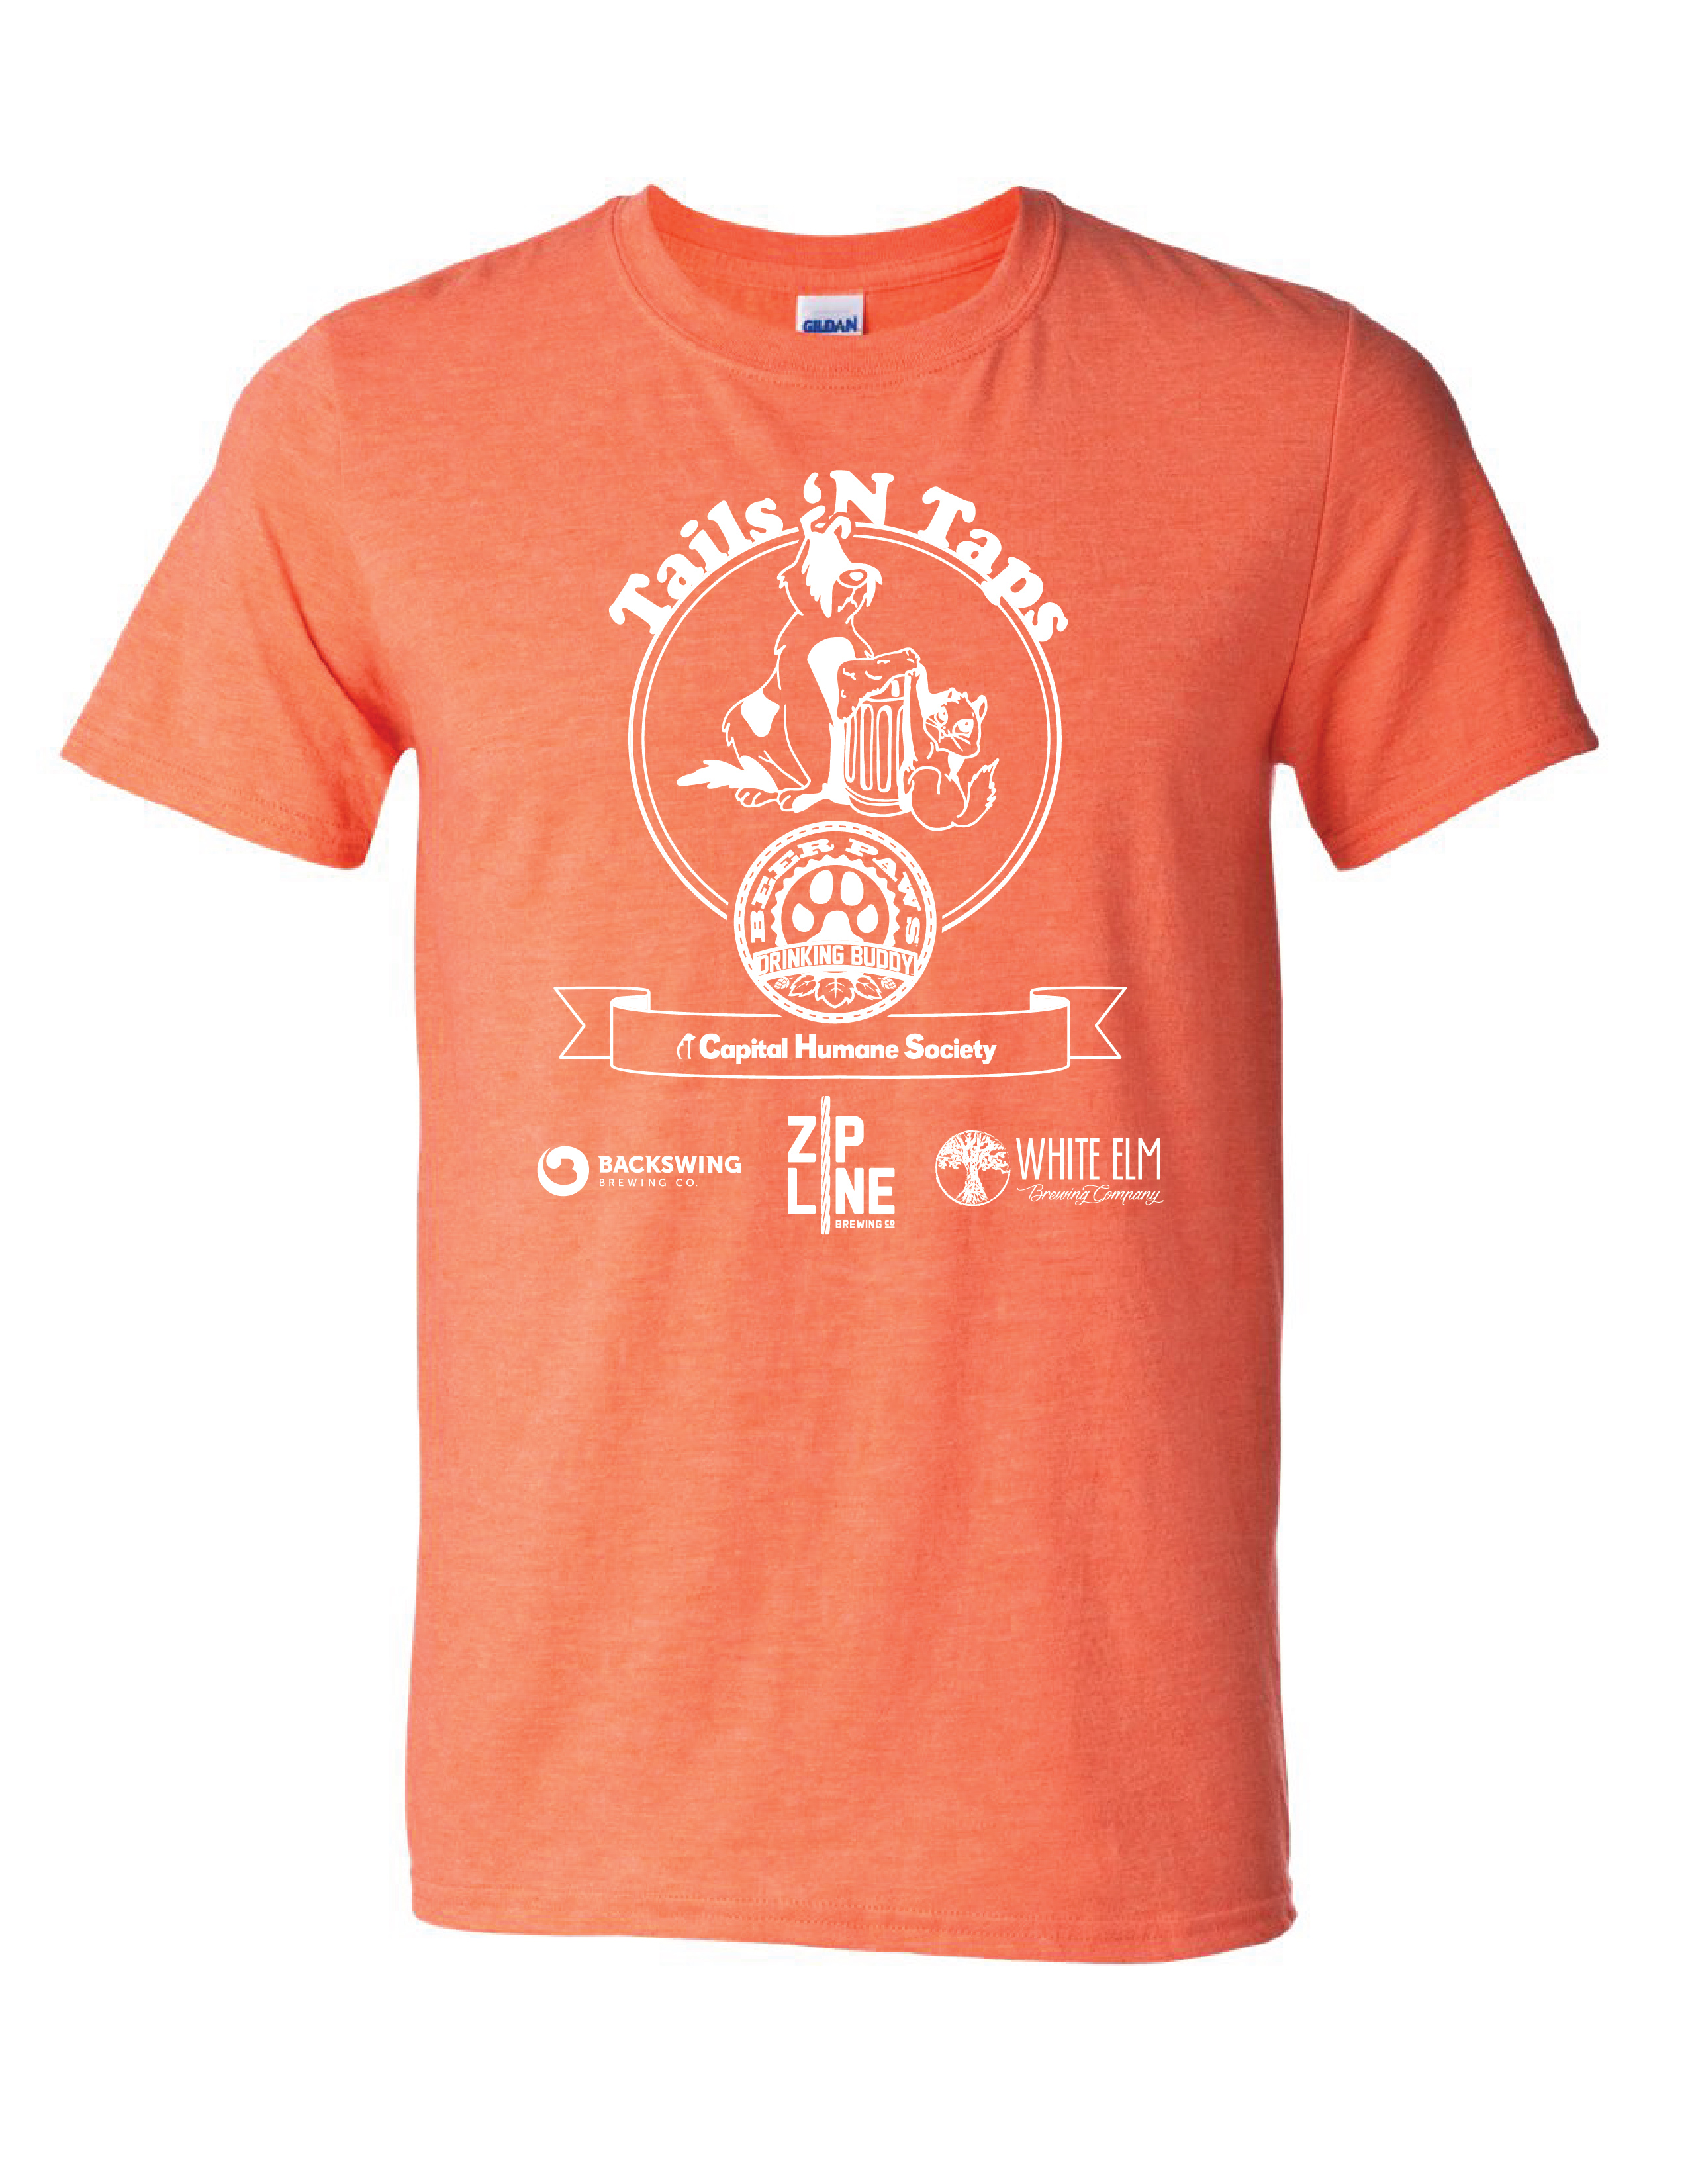 tails and taps shirt mockup with zipline-01.jpg